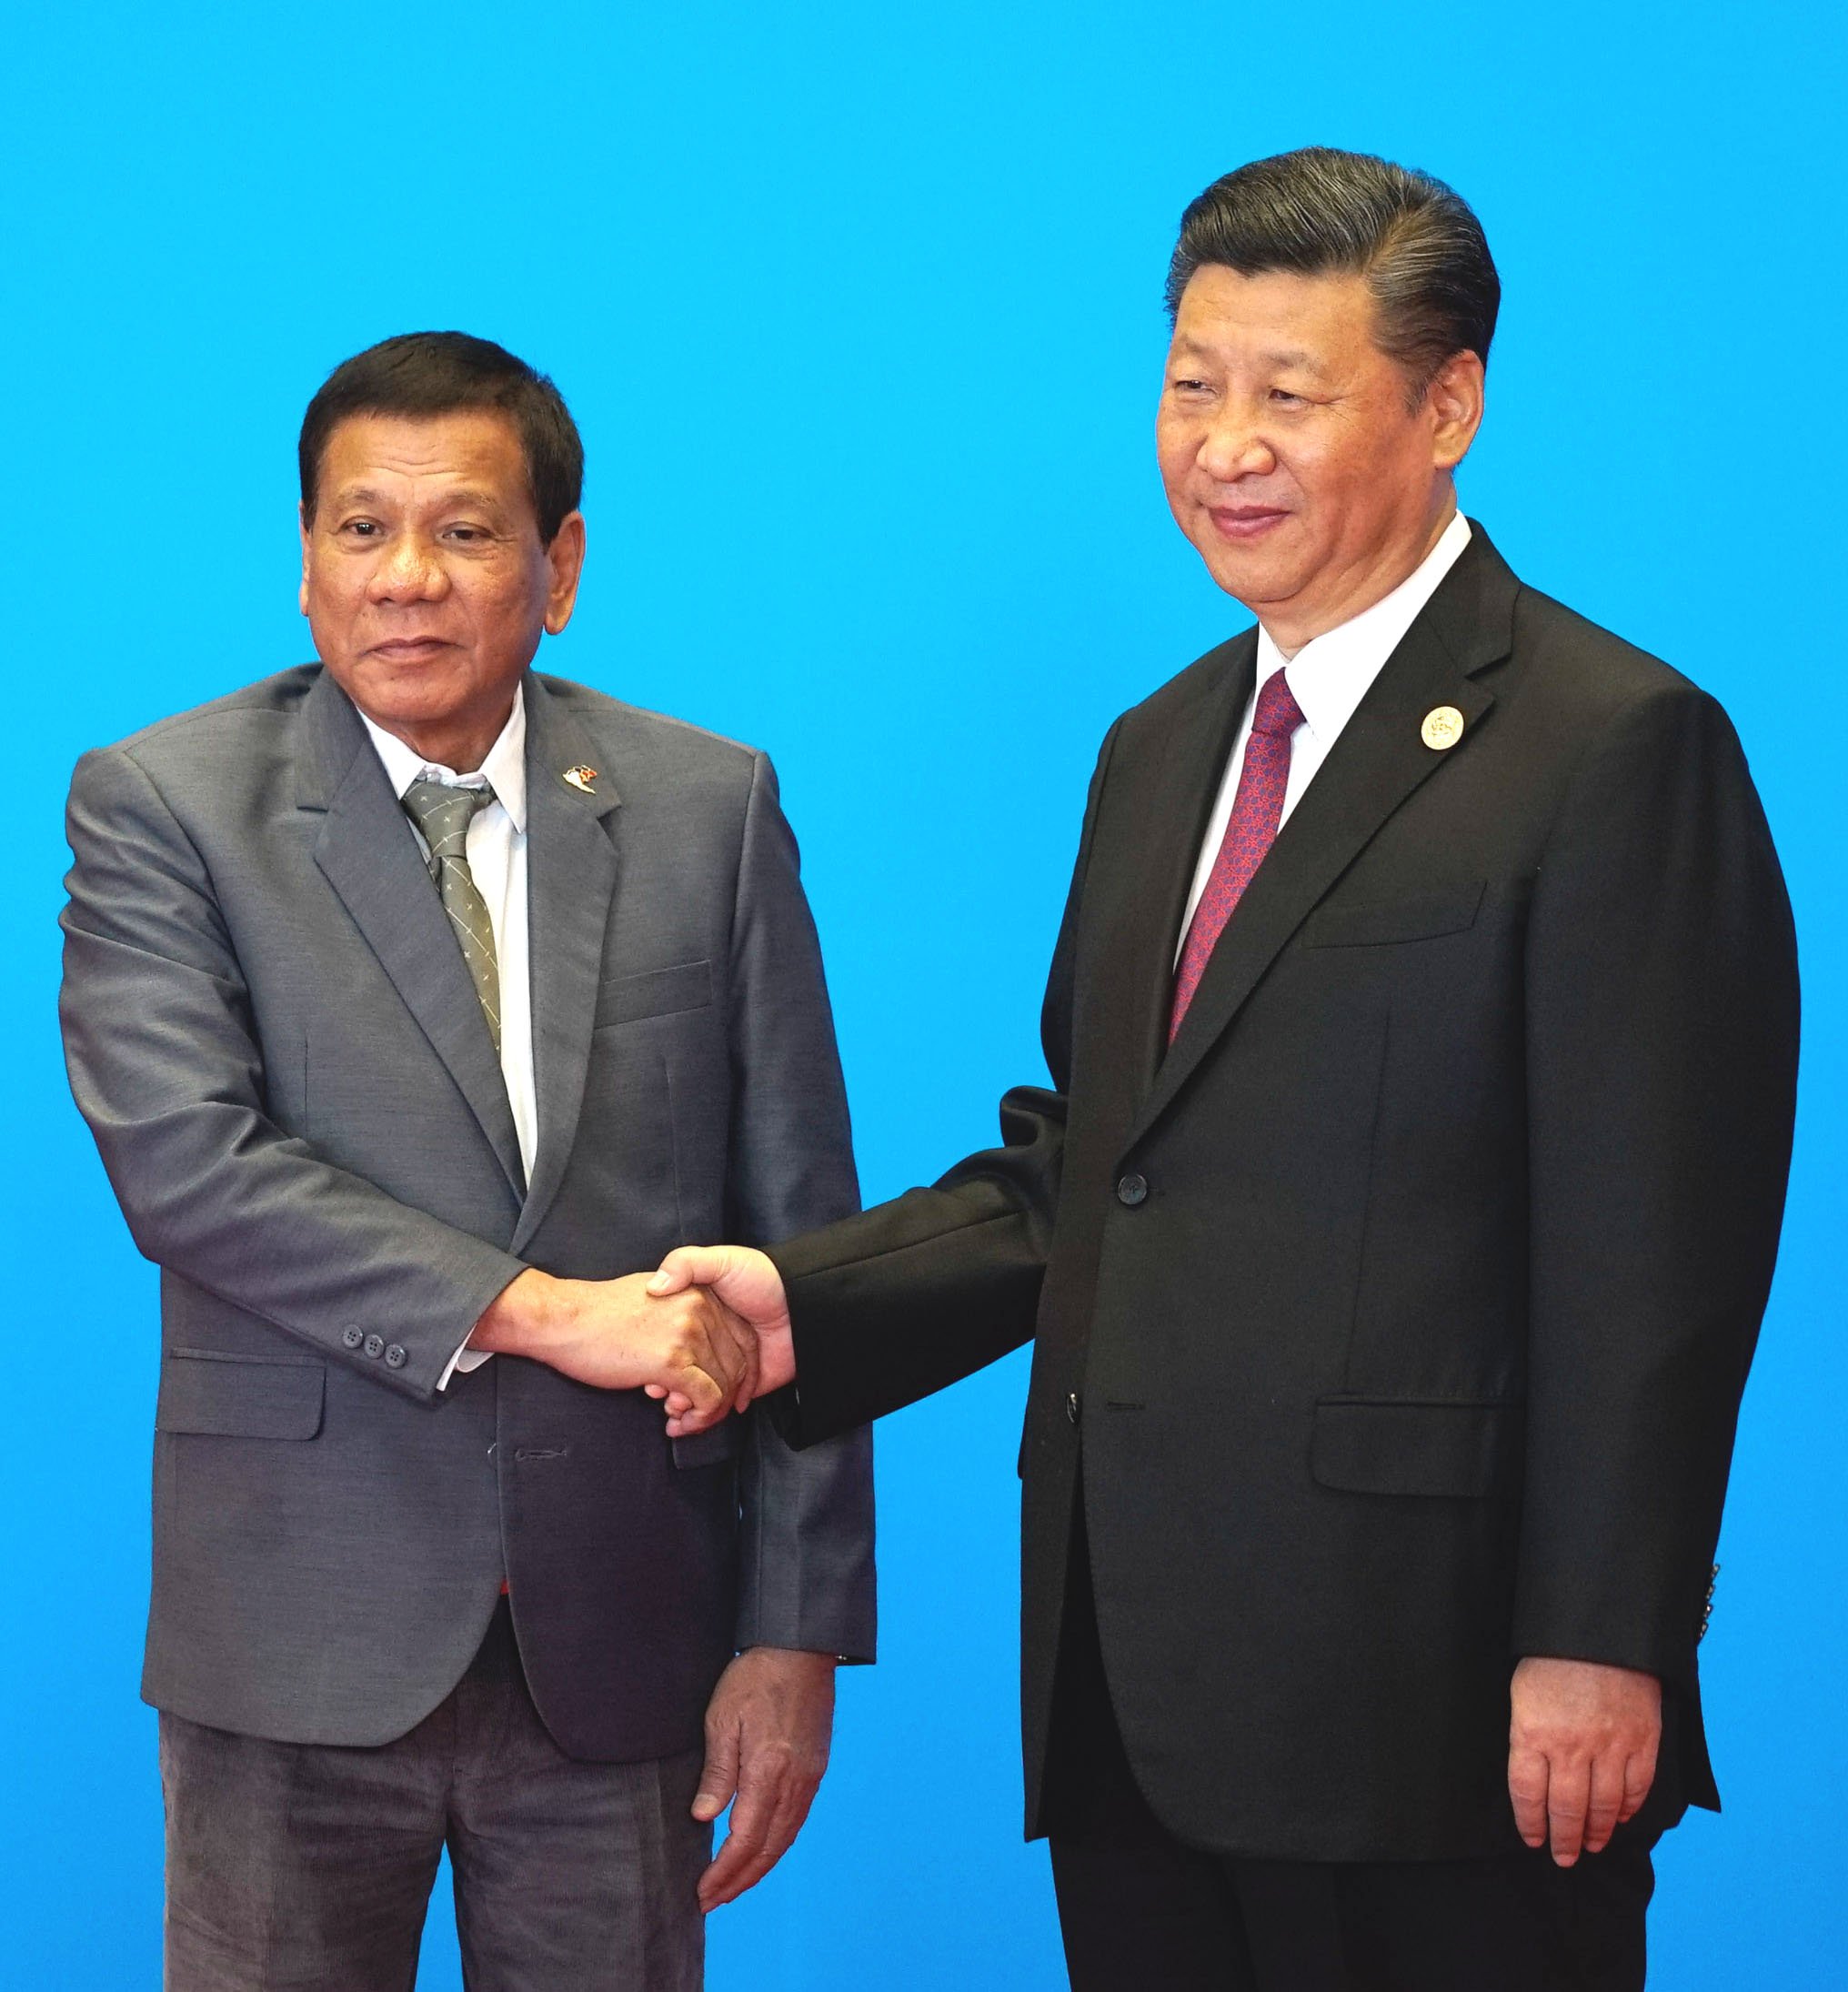 PRRD welcomed by President Xi Jinping at Belt and Road Forum in China